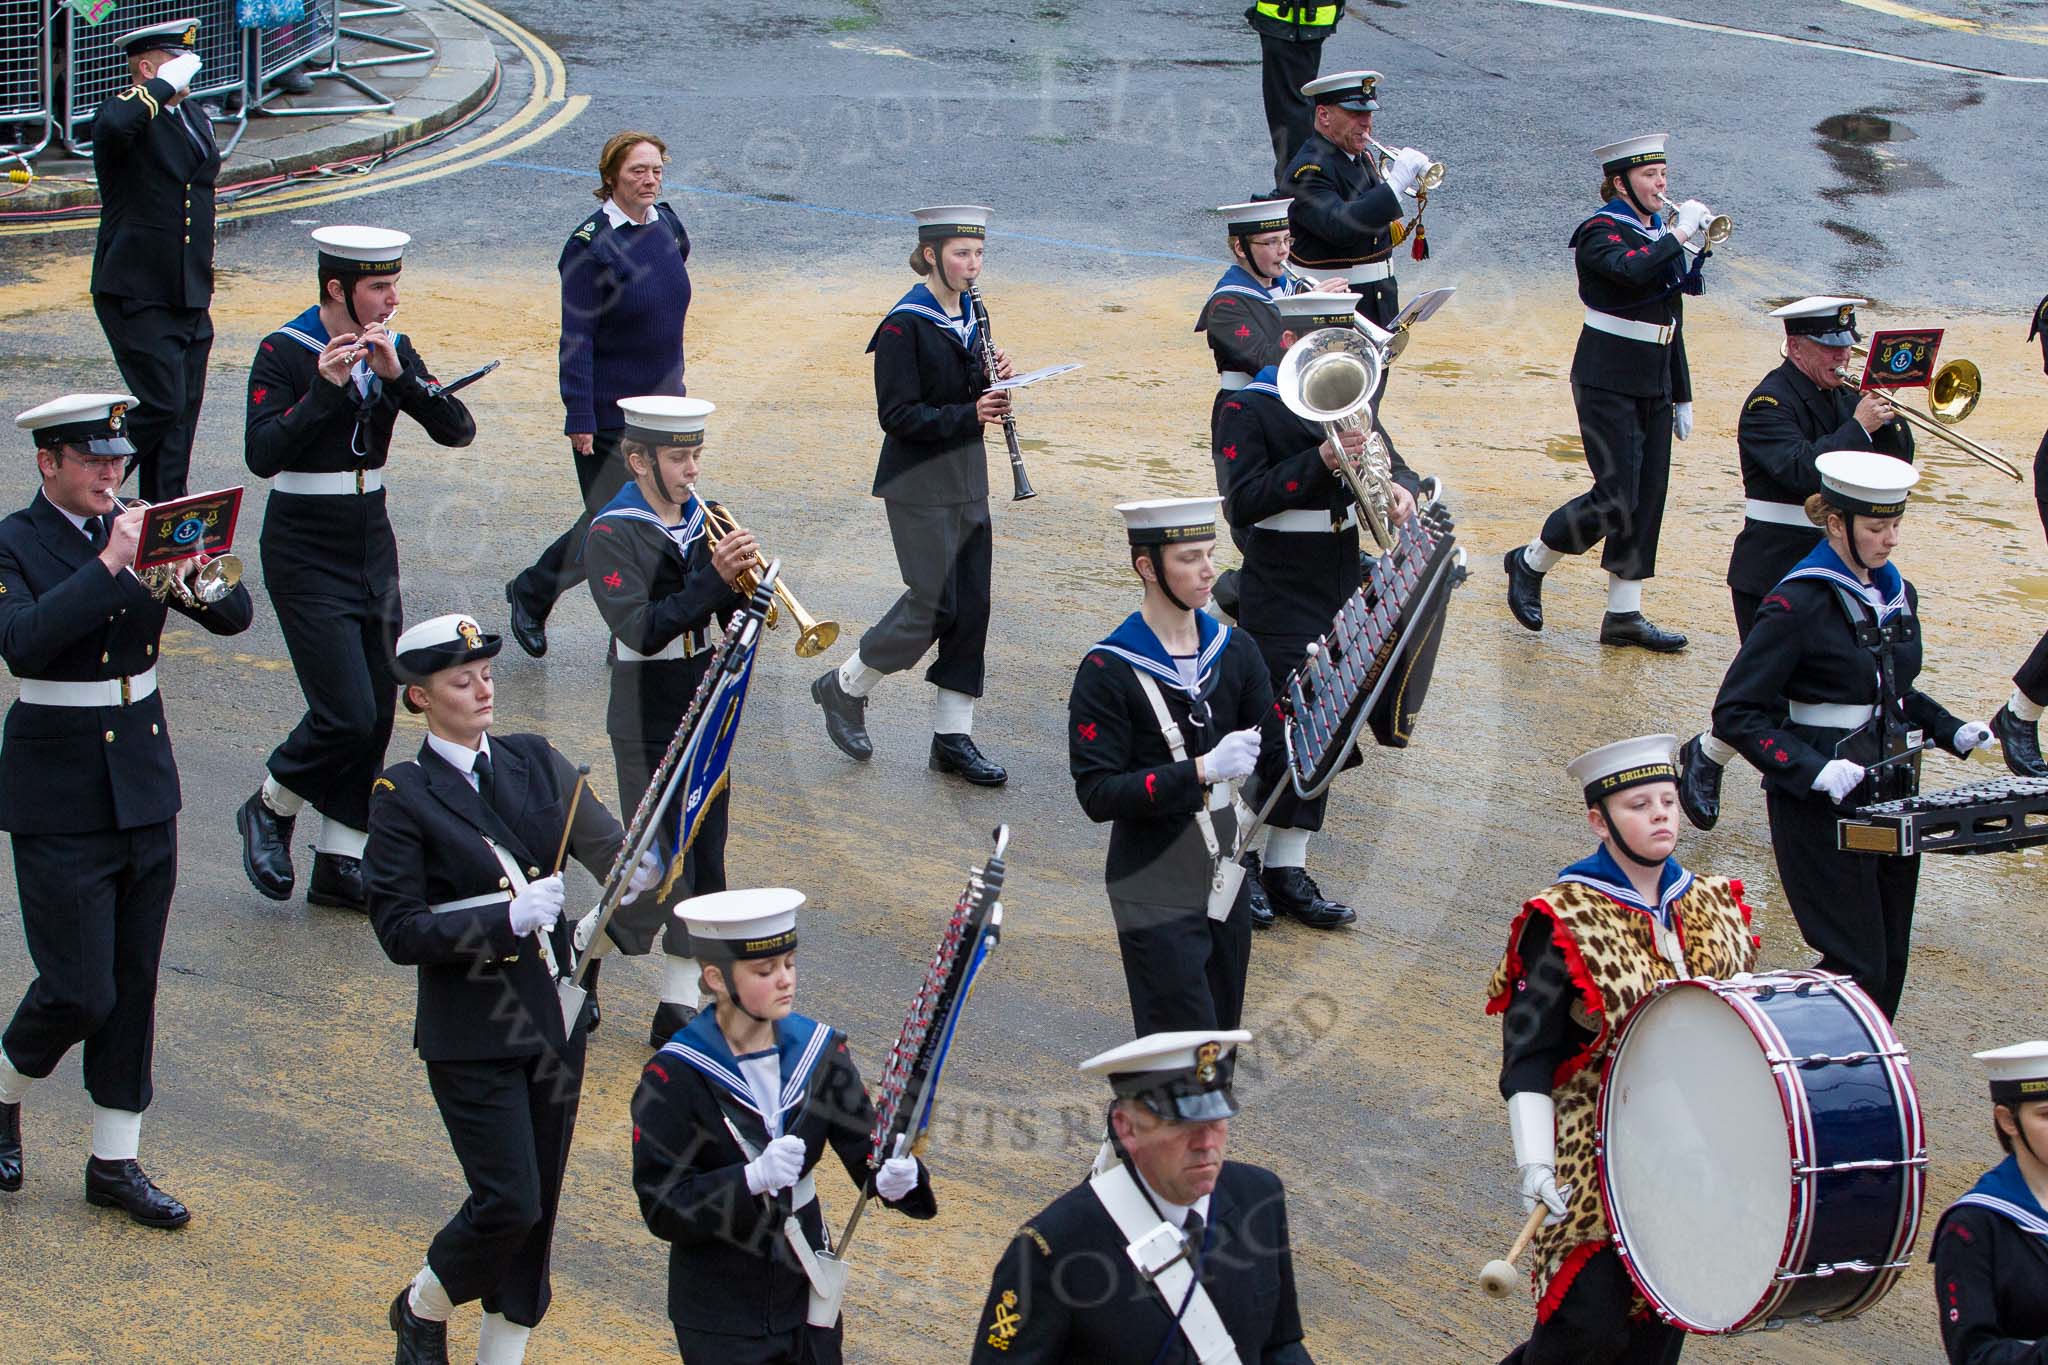 Lord Mayor's Show 2012: Entry 98 - Sea Cadet Corps Band..
Press stand opposite Mansion House, City of London,
London,
Greater London,
United Kingdom,
on 10 November 2012 at 11:45, image #1312